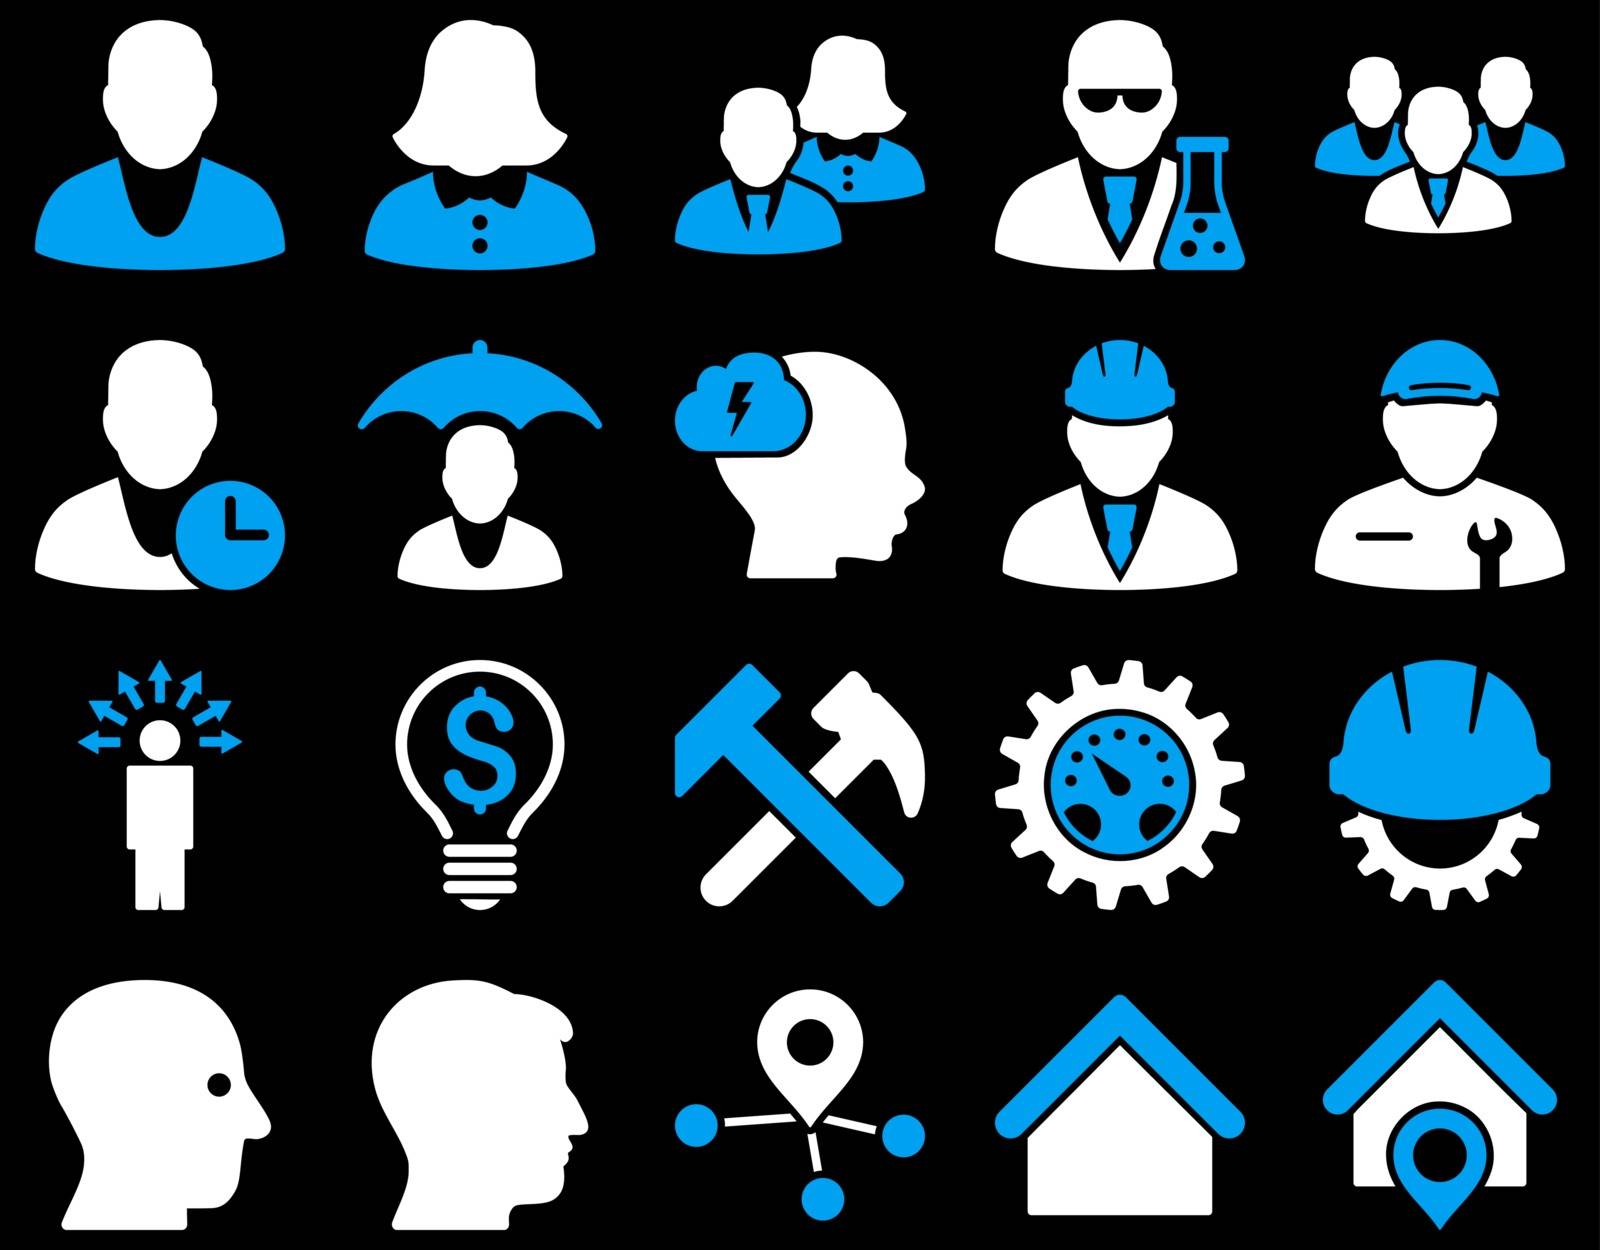 Client and business icon set. These flat bicolor icons use blue and white colors. Images are isolated on a black background. Angles are rounded.